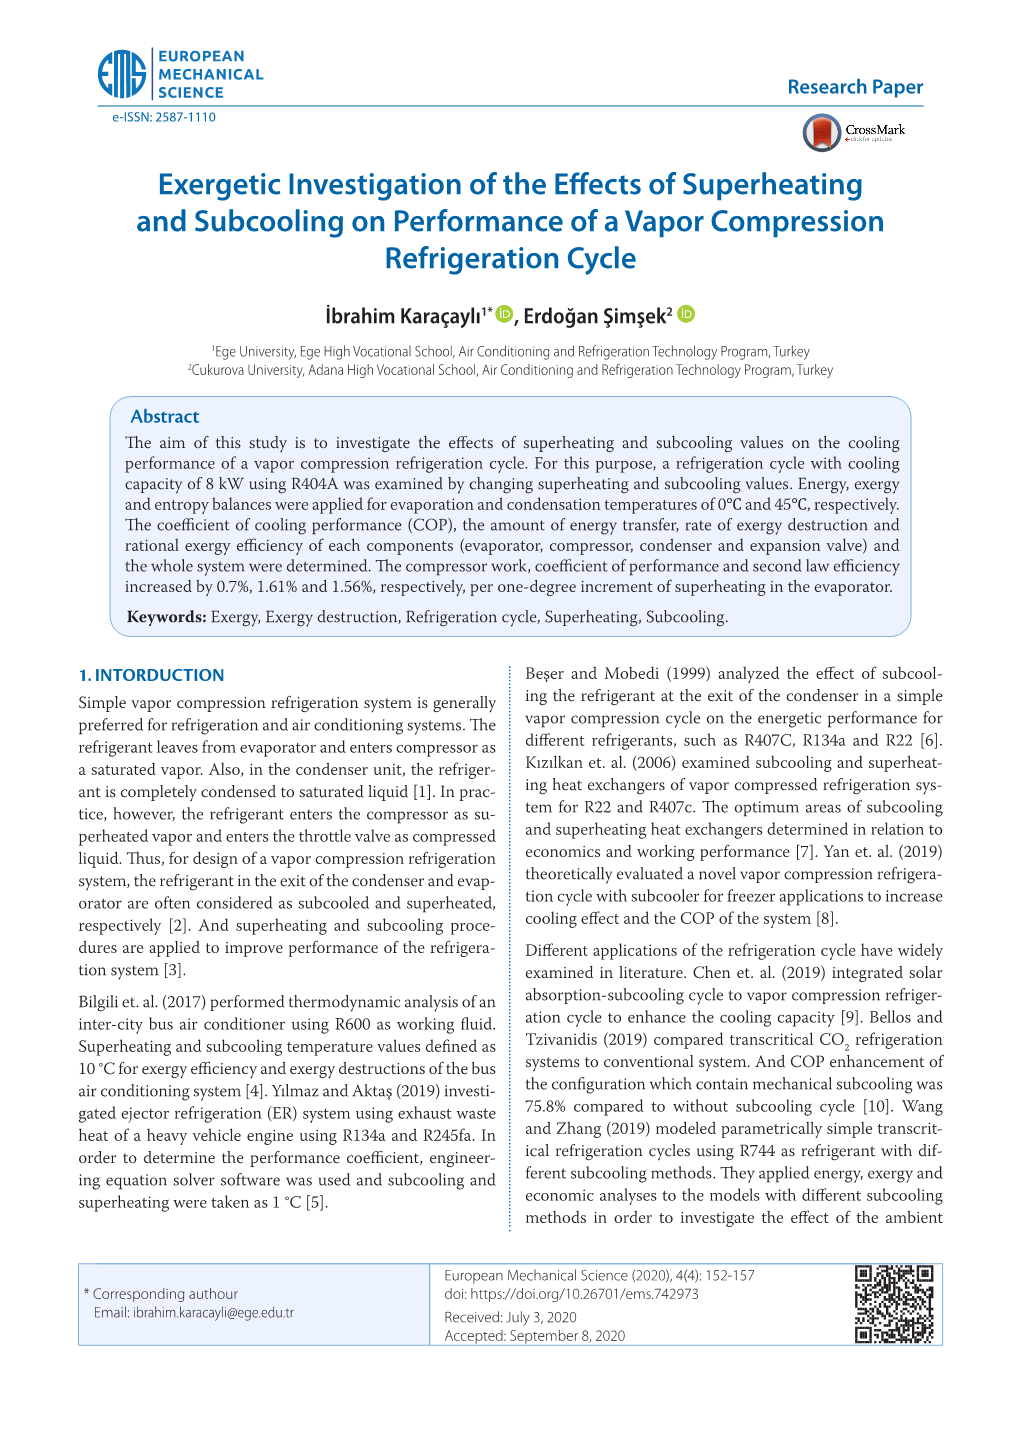 Exergetic Investigation of the Effects of Superheating and Subcooling on Performance of a Vapor Compression Refrigeration Cycle